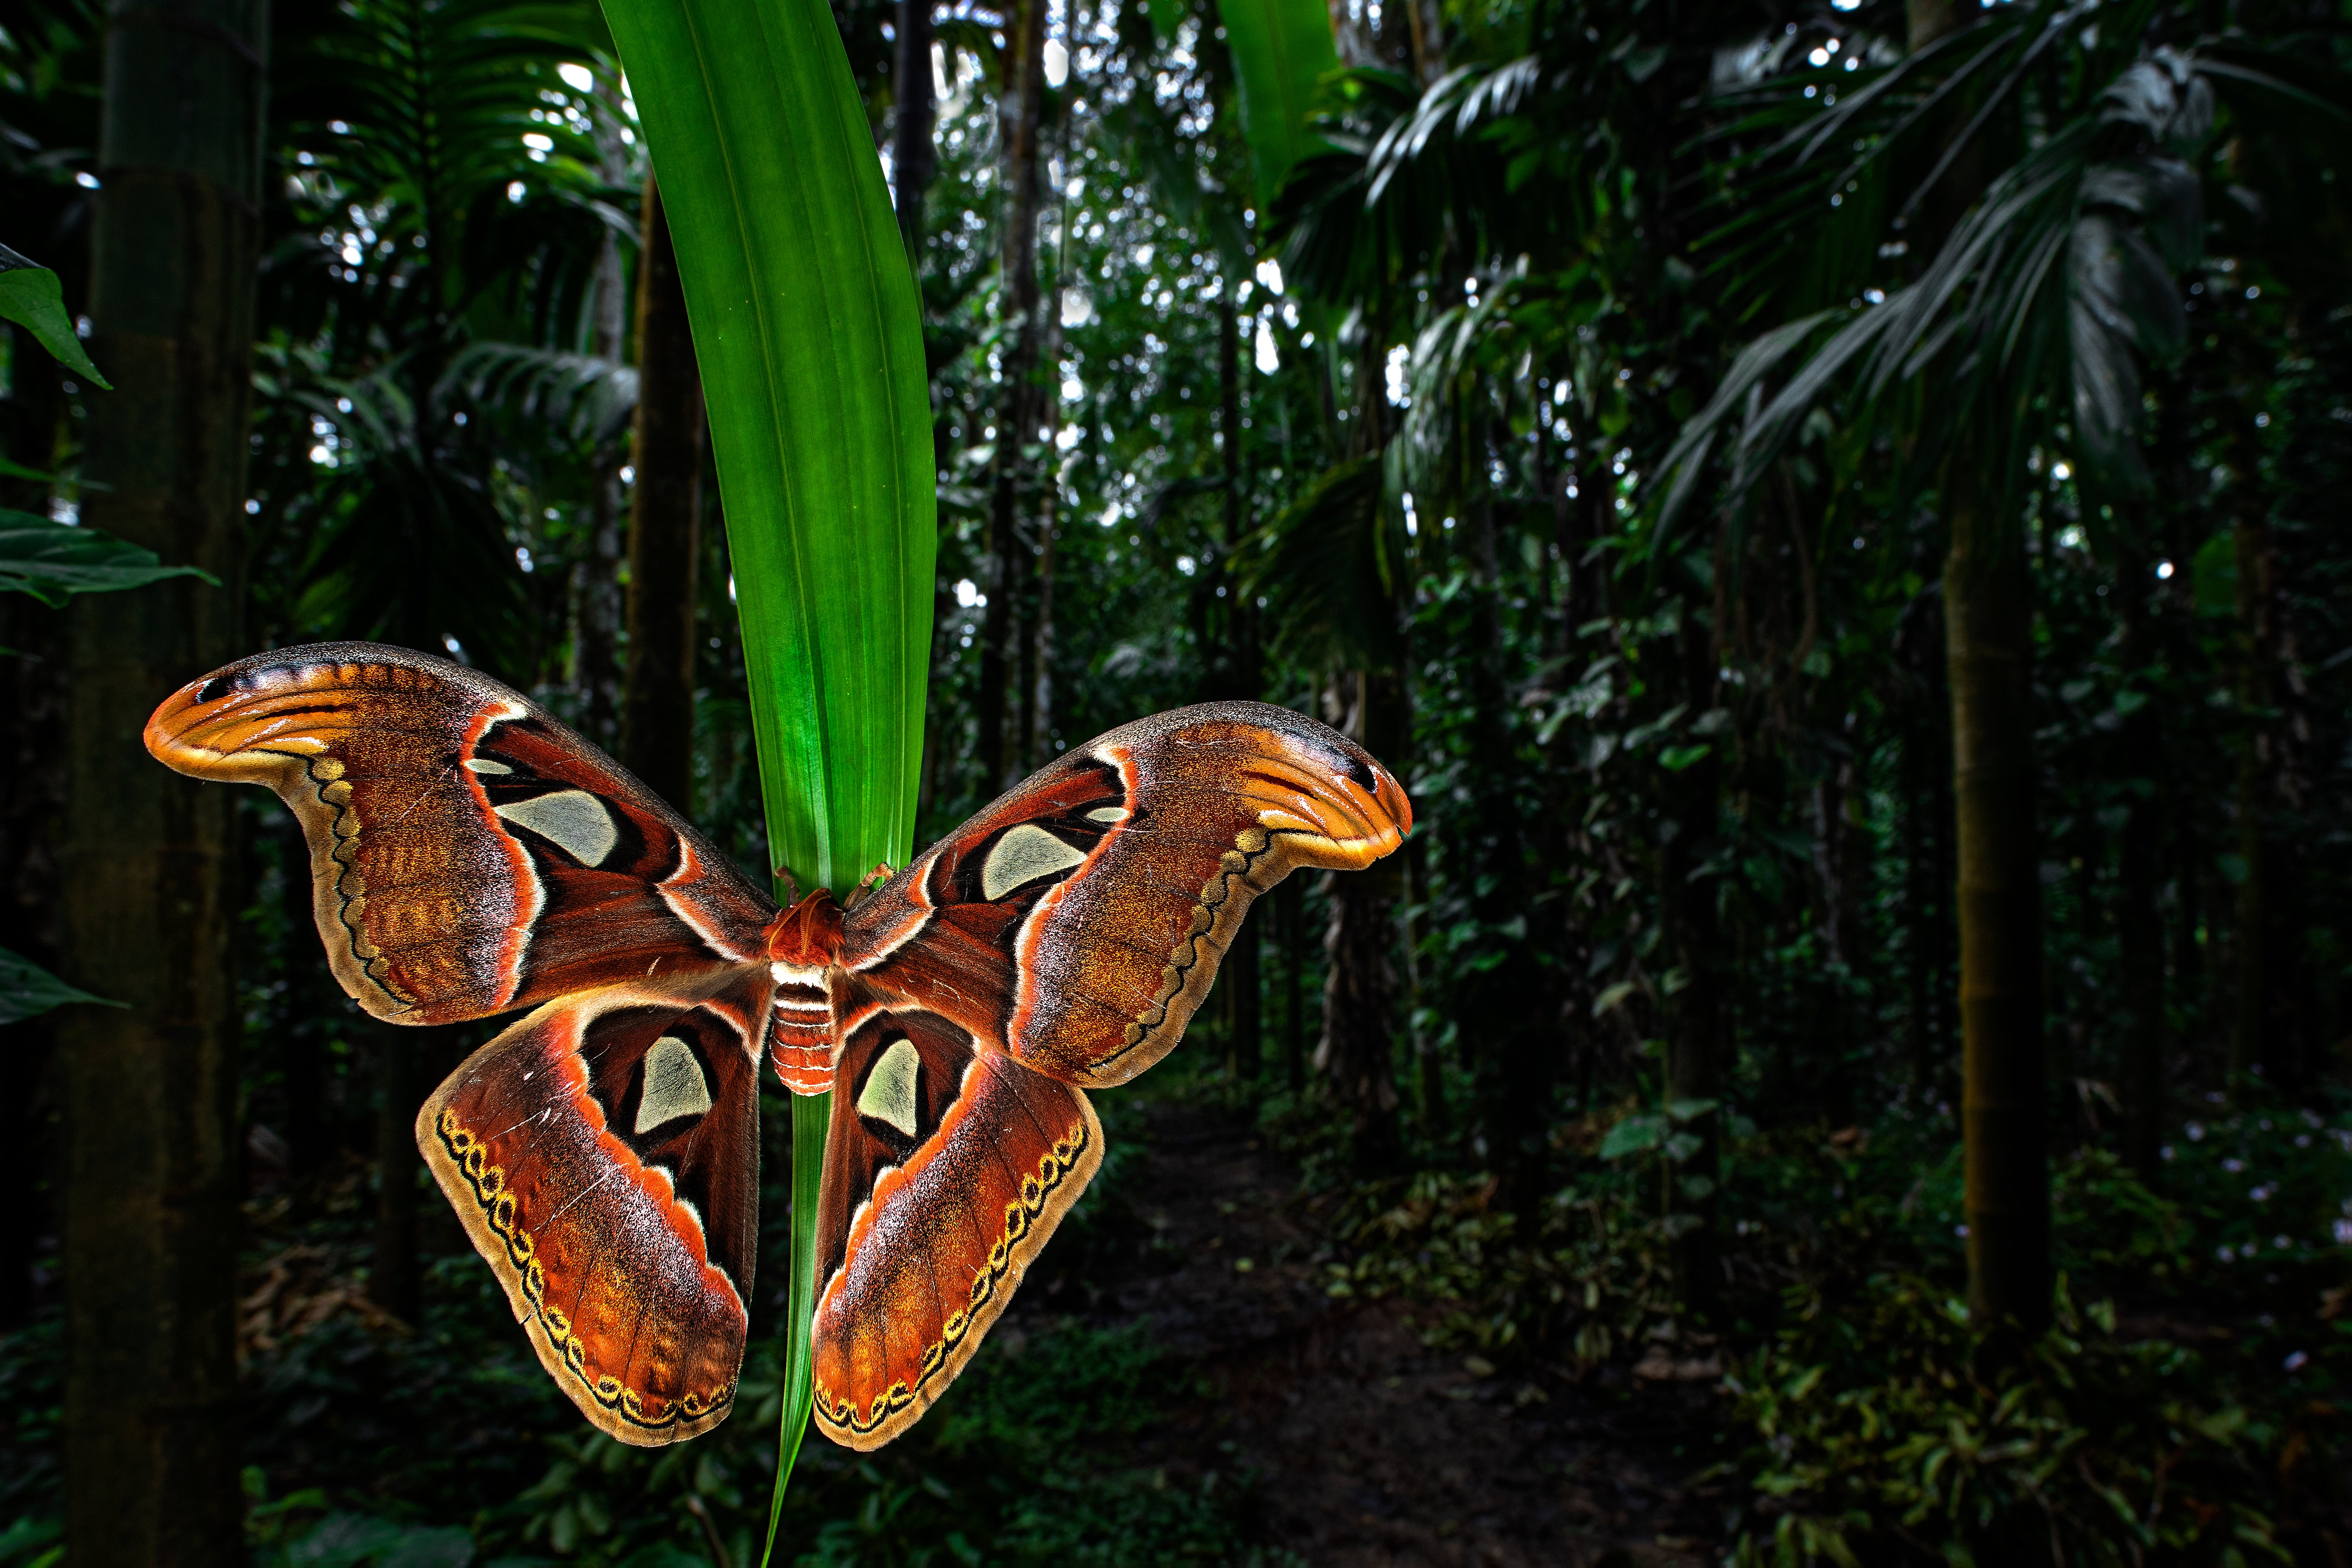 An Atlas moth in Sirsi, India. (Photo: Uday Hegde)